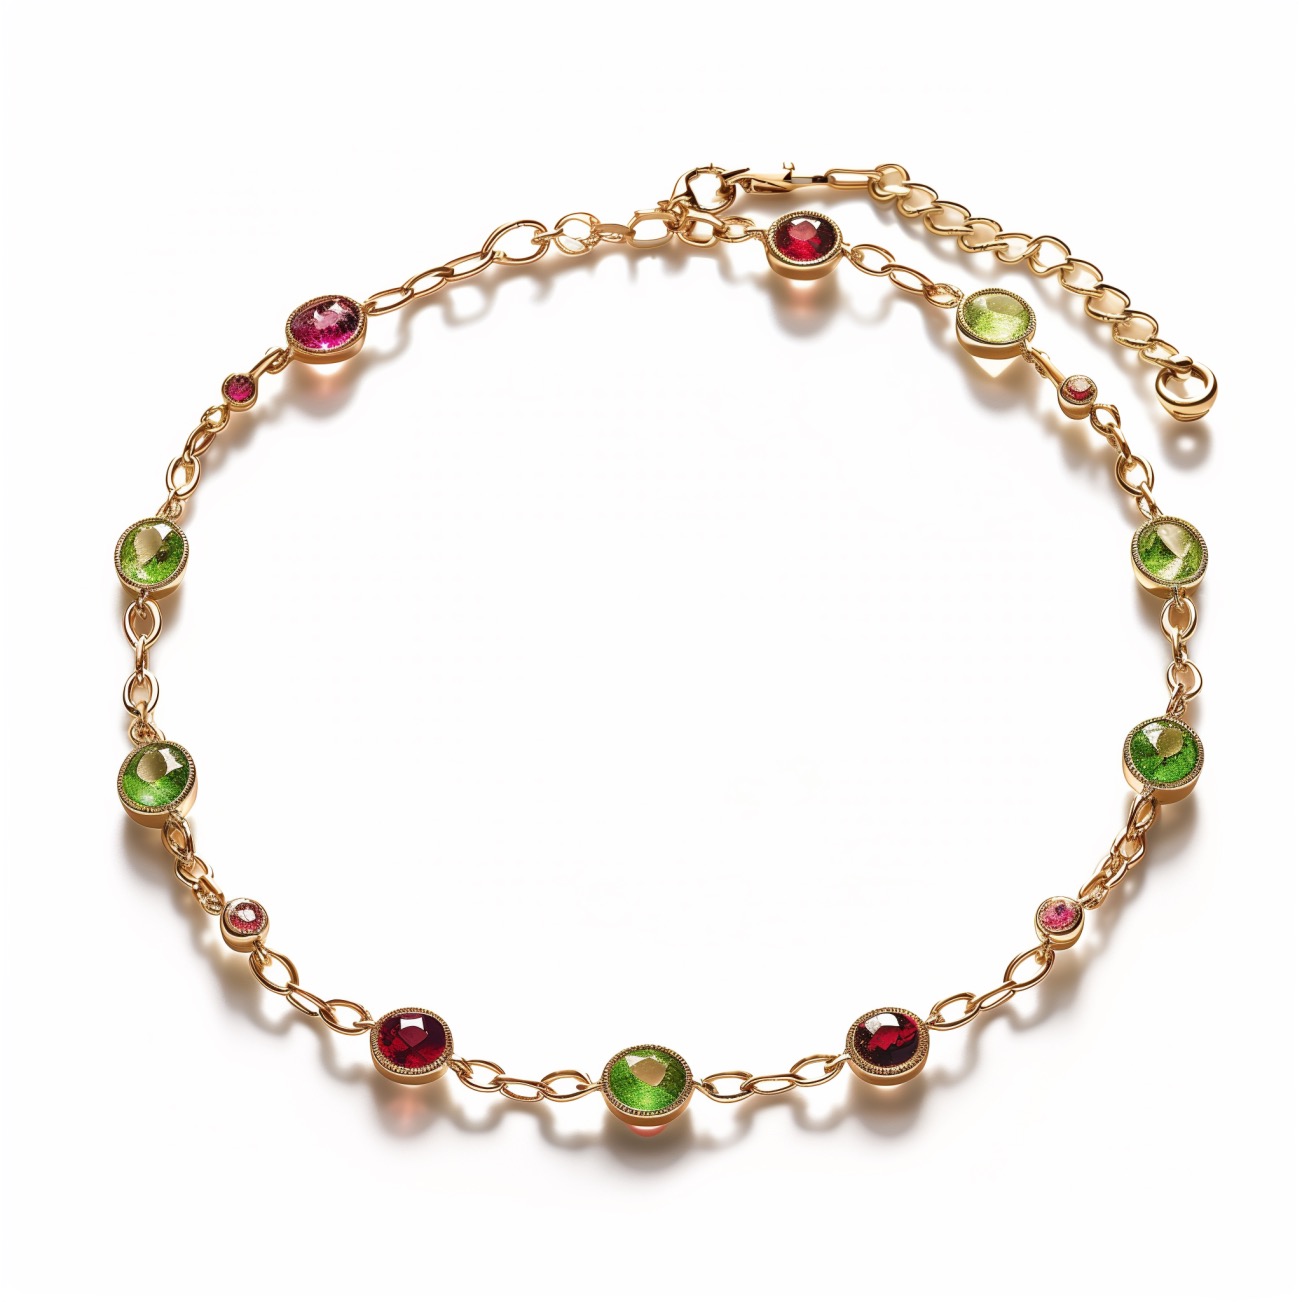 Gold chain bracelet set with alternating tumbled peridot and ruby stones.